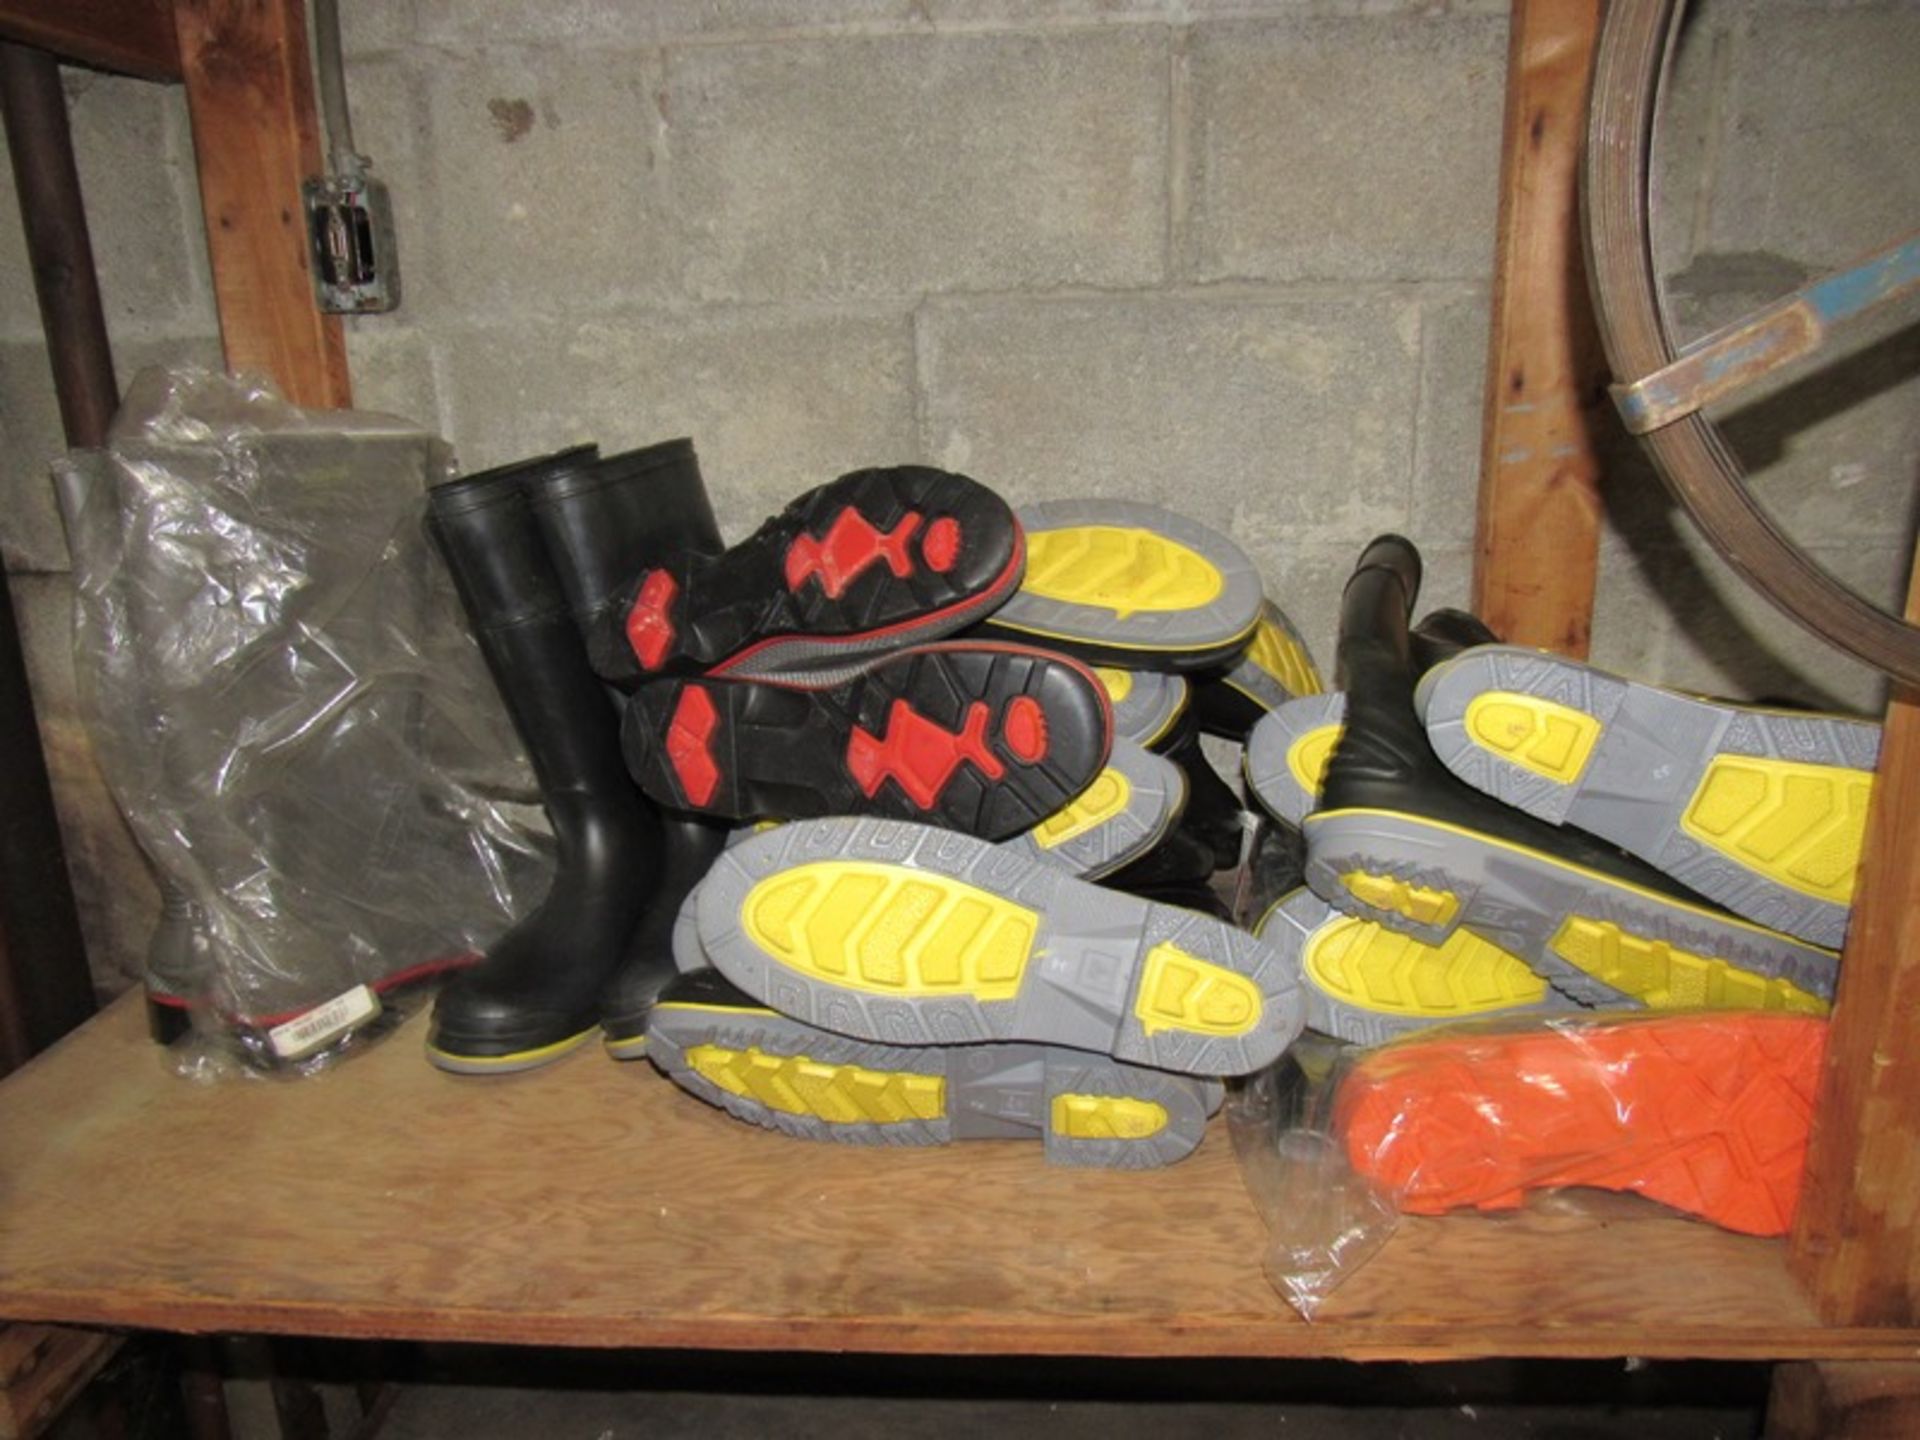 Lot Rubber Boot Wash, Rubber Anti-Fatigue Mats, Rubber Boots, (5) size 12, (3) size 11, (1) size - Image 3 of 4